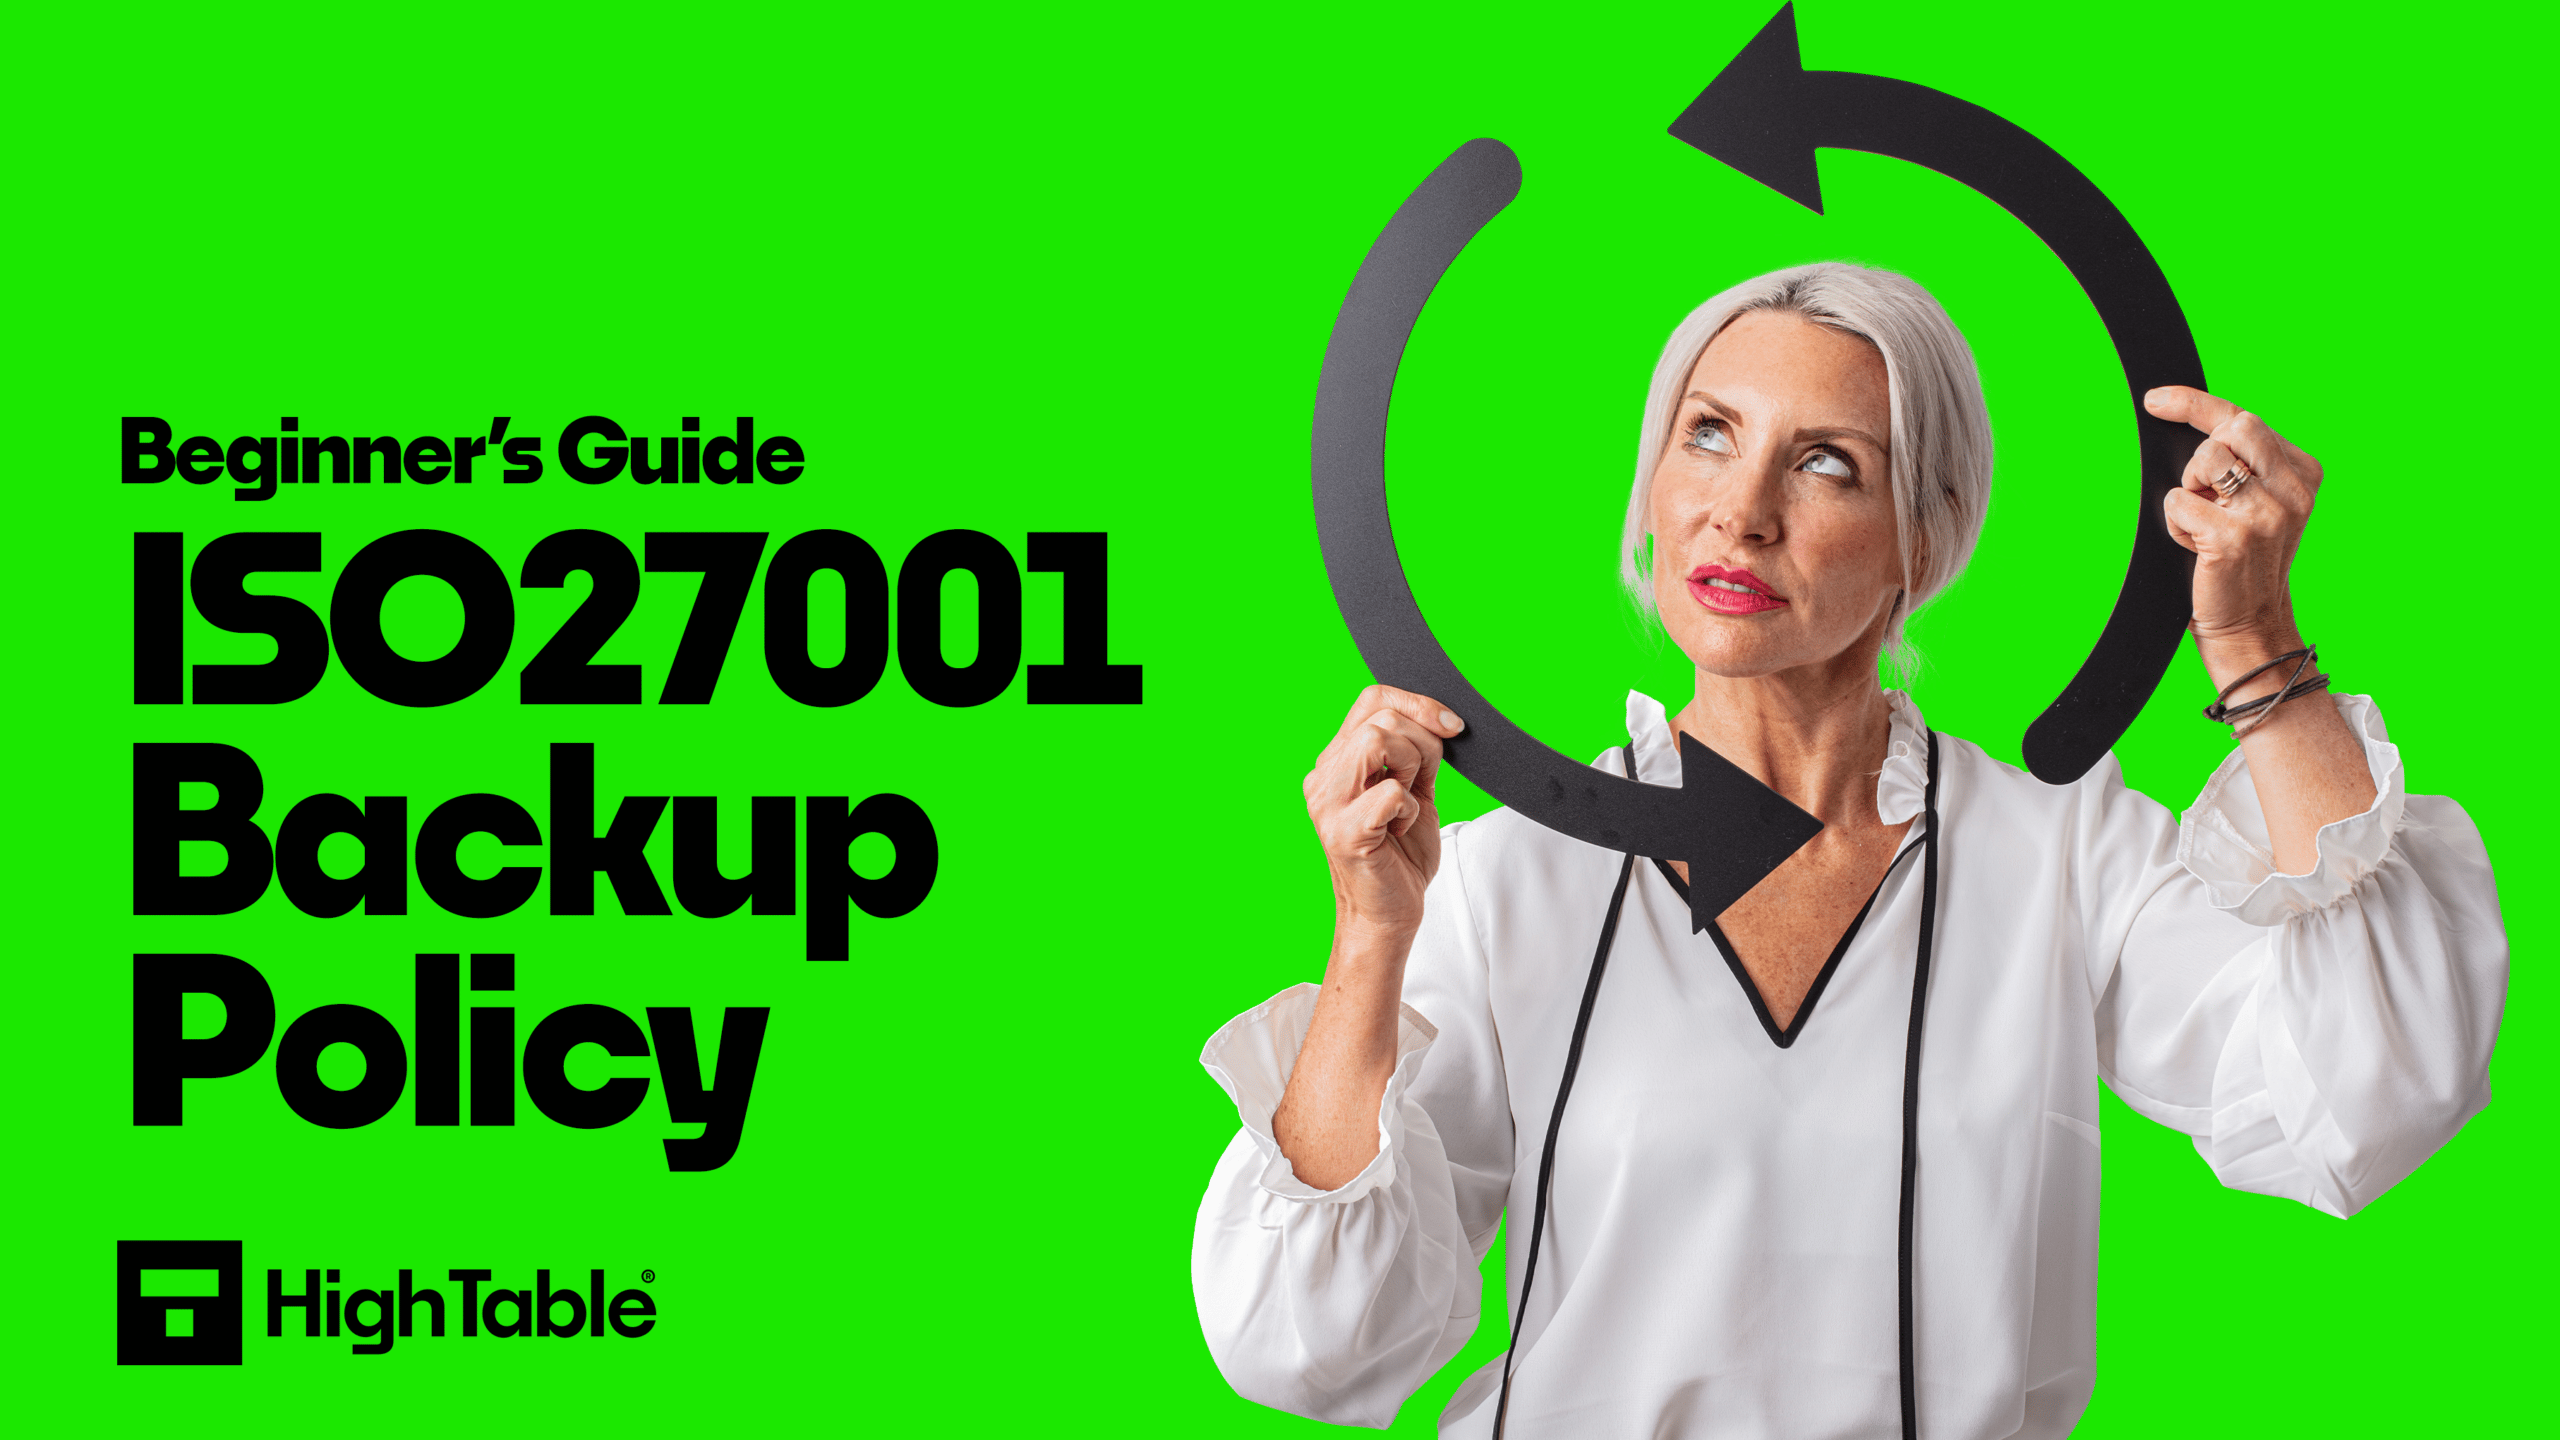 ISO 27001 Backup Policy Beginner’s Guide